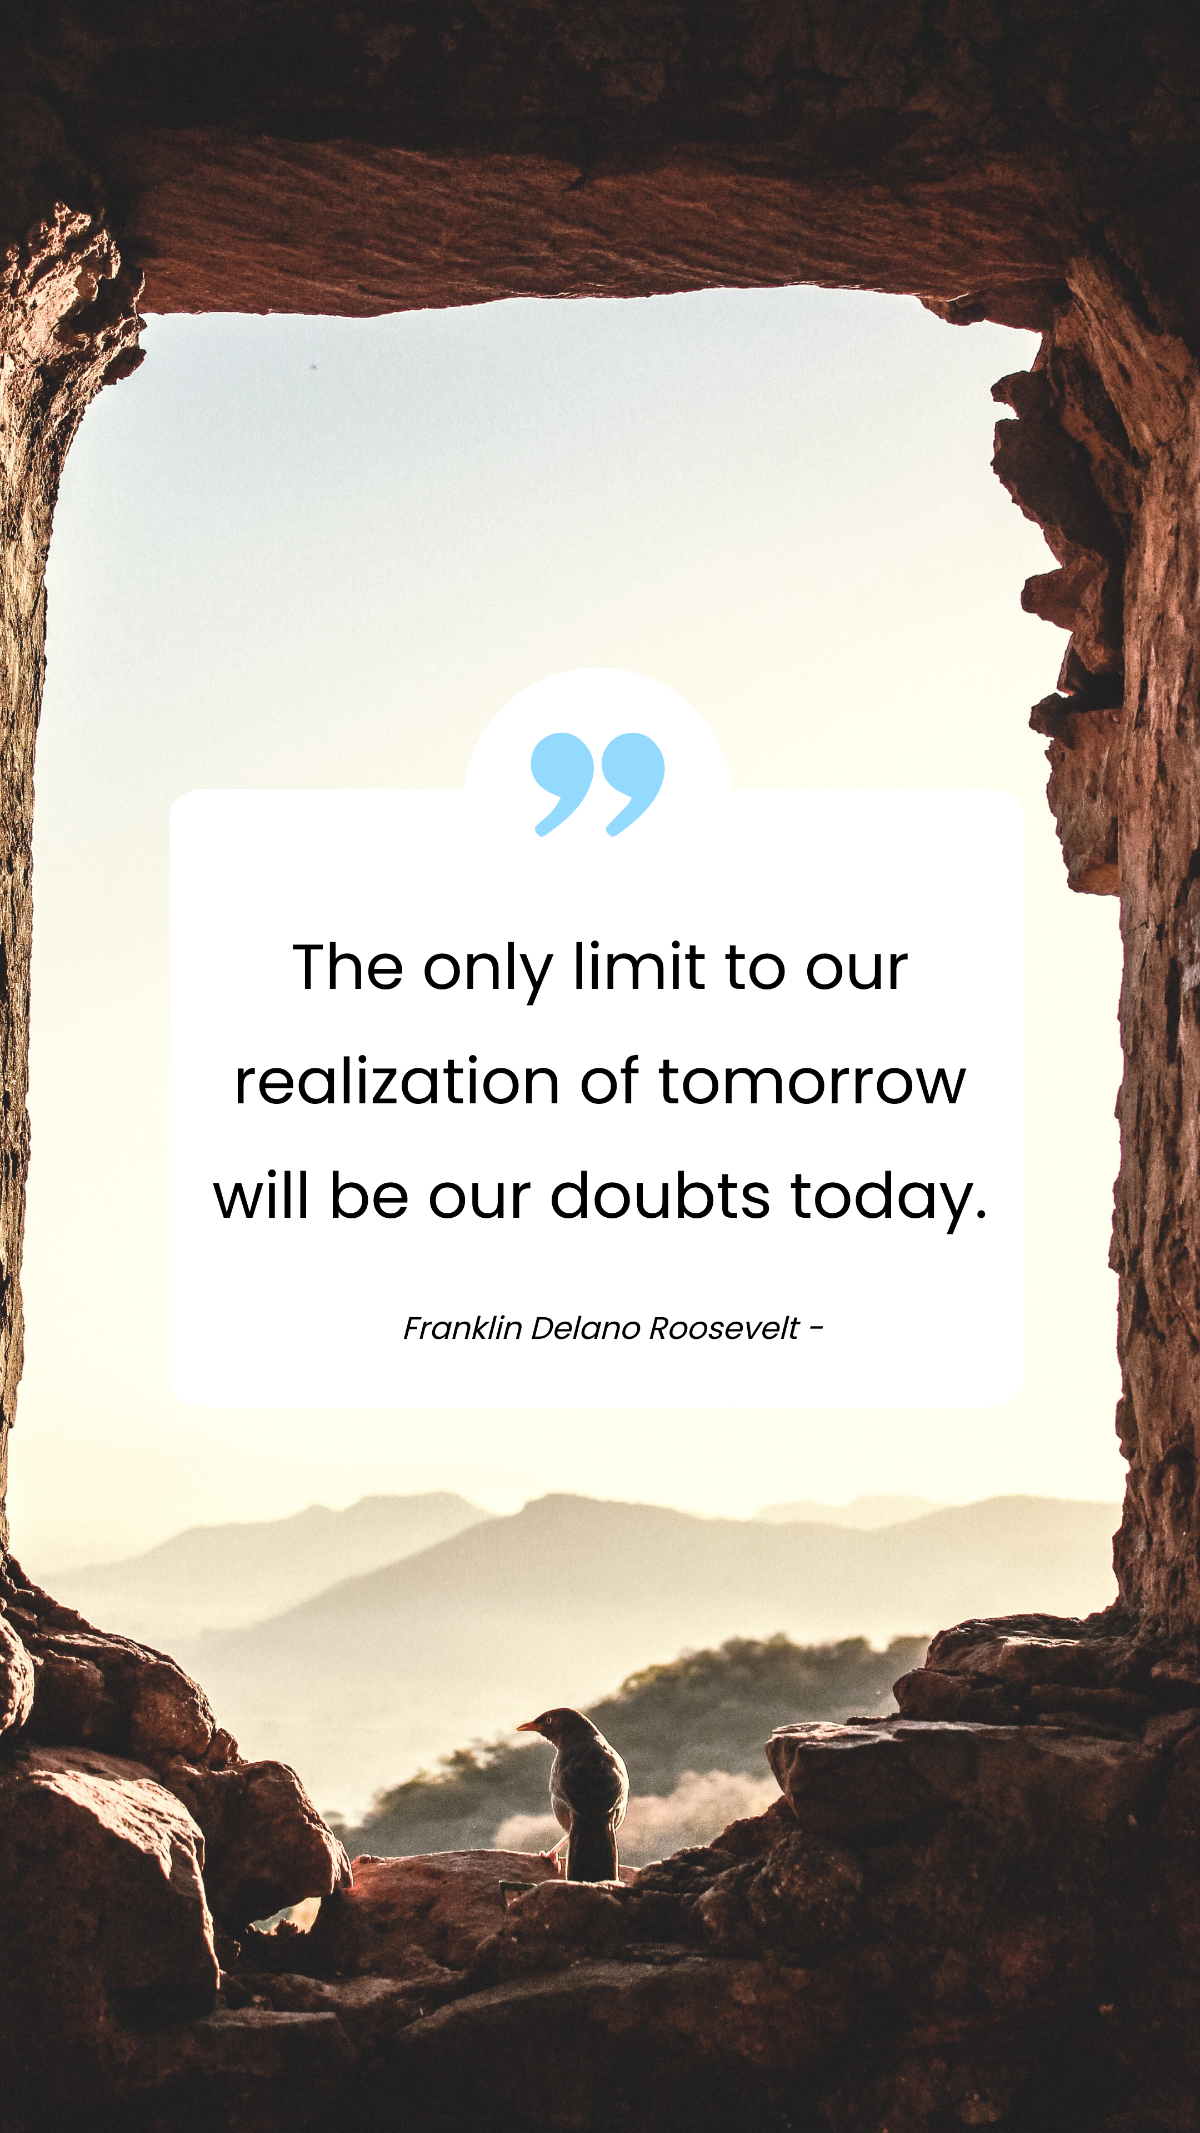 Franklin Delano Roosevelt - The only limit to our realization of tomorrow will be our doubts today.